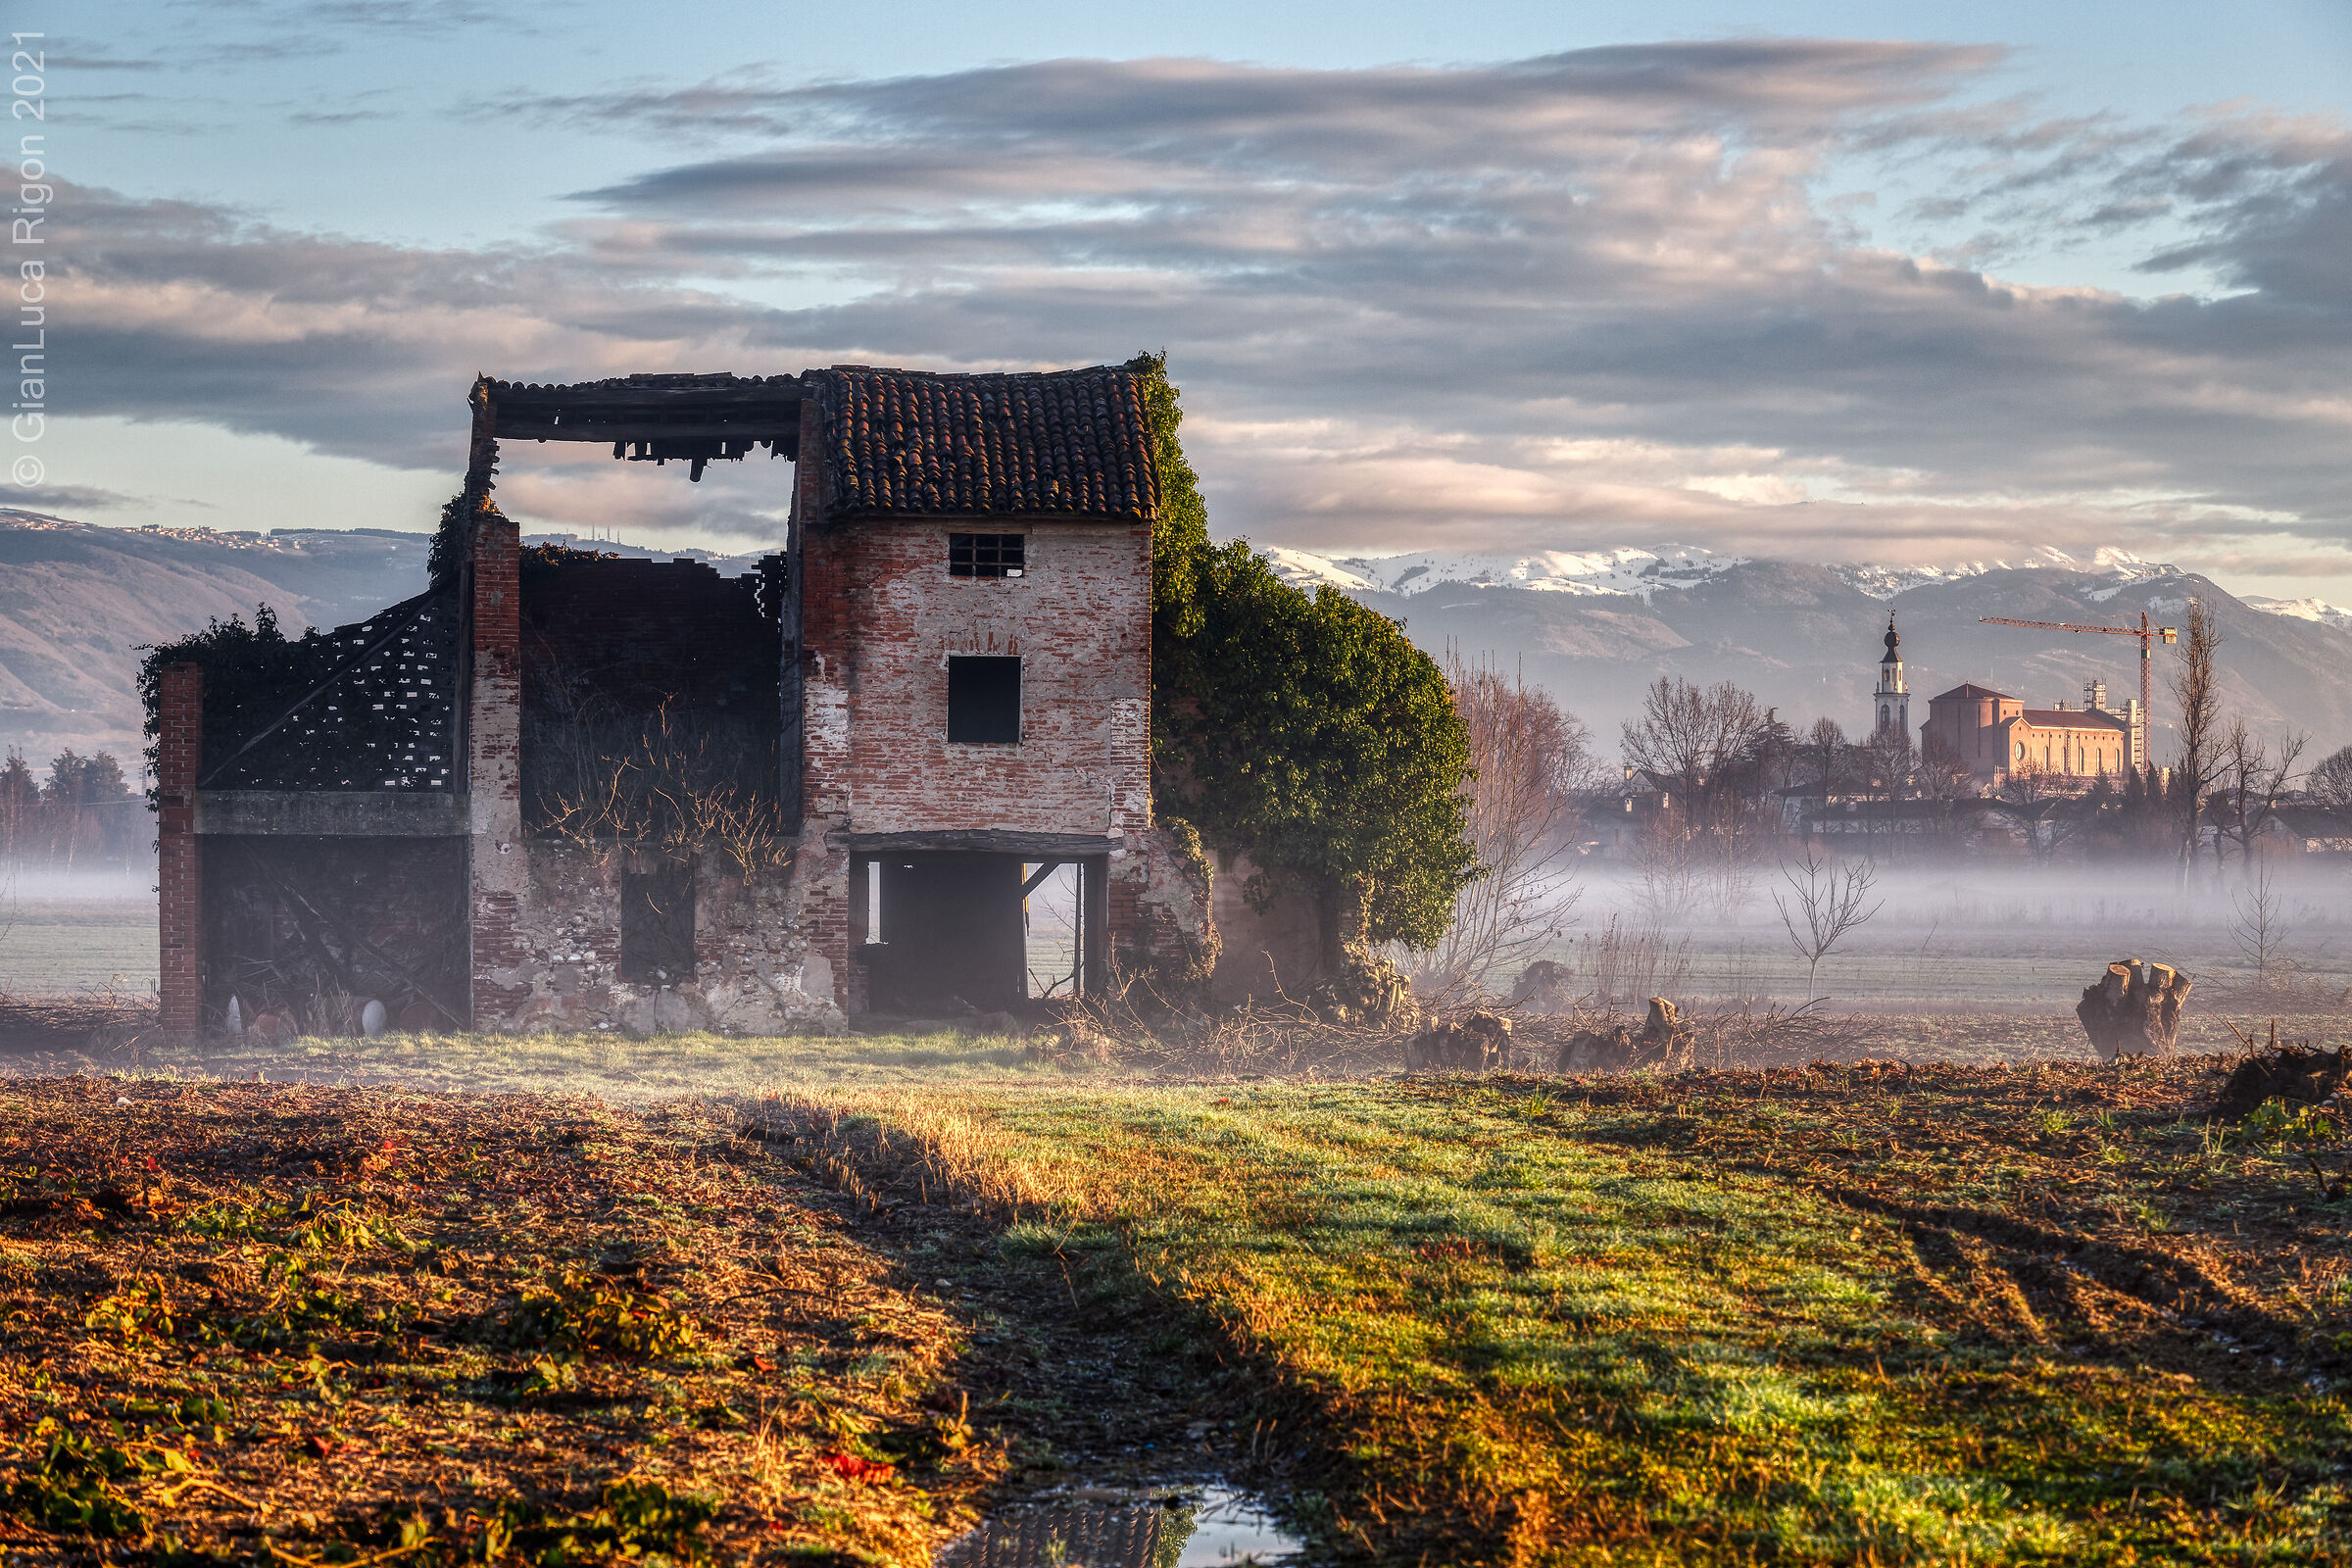 The abandoned rustic...